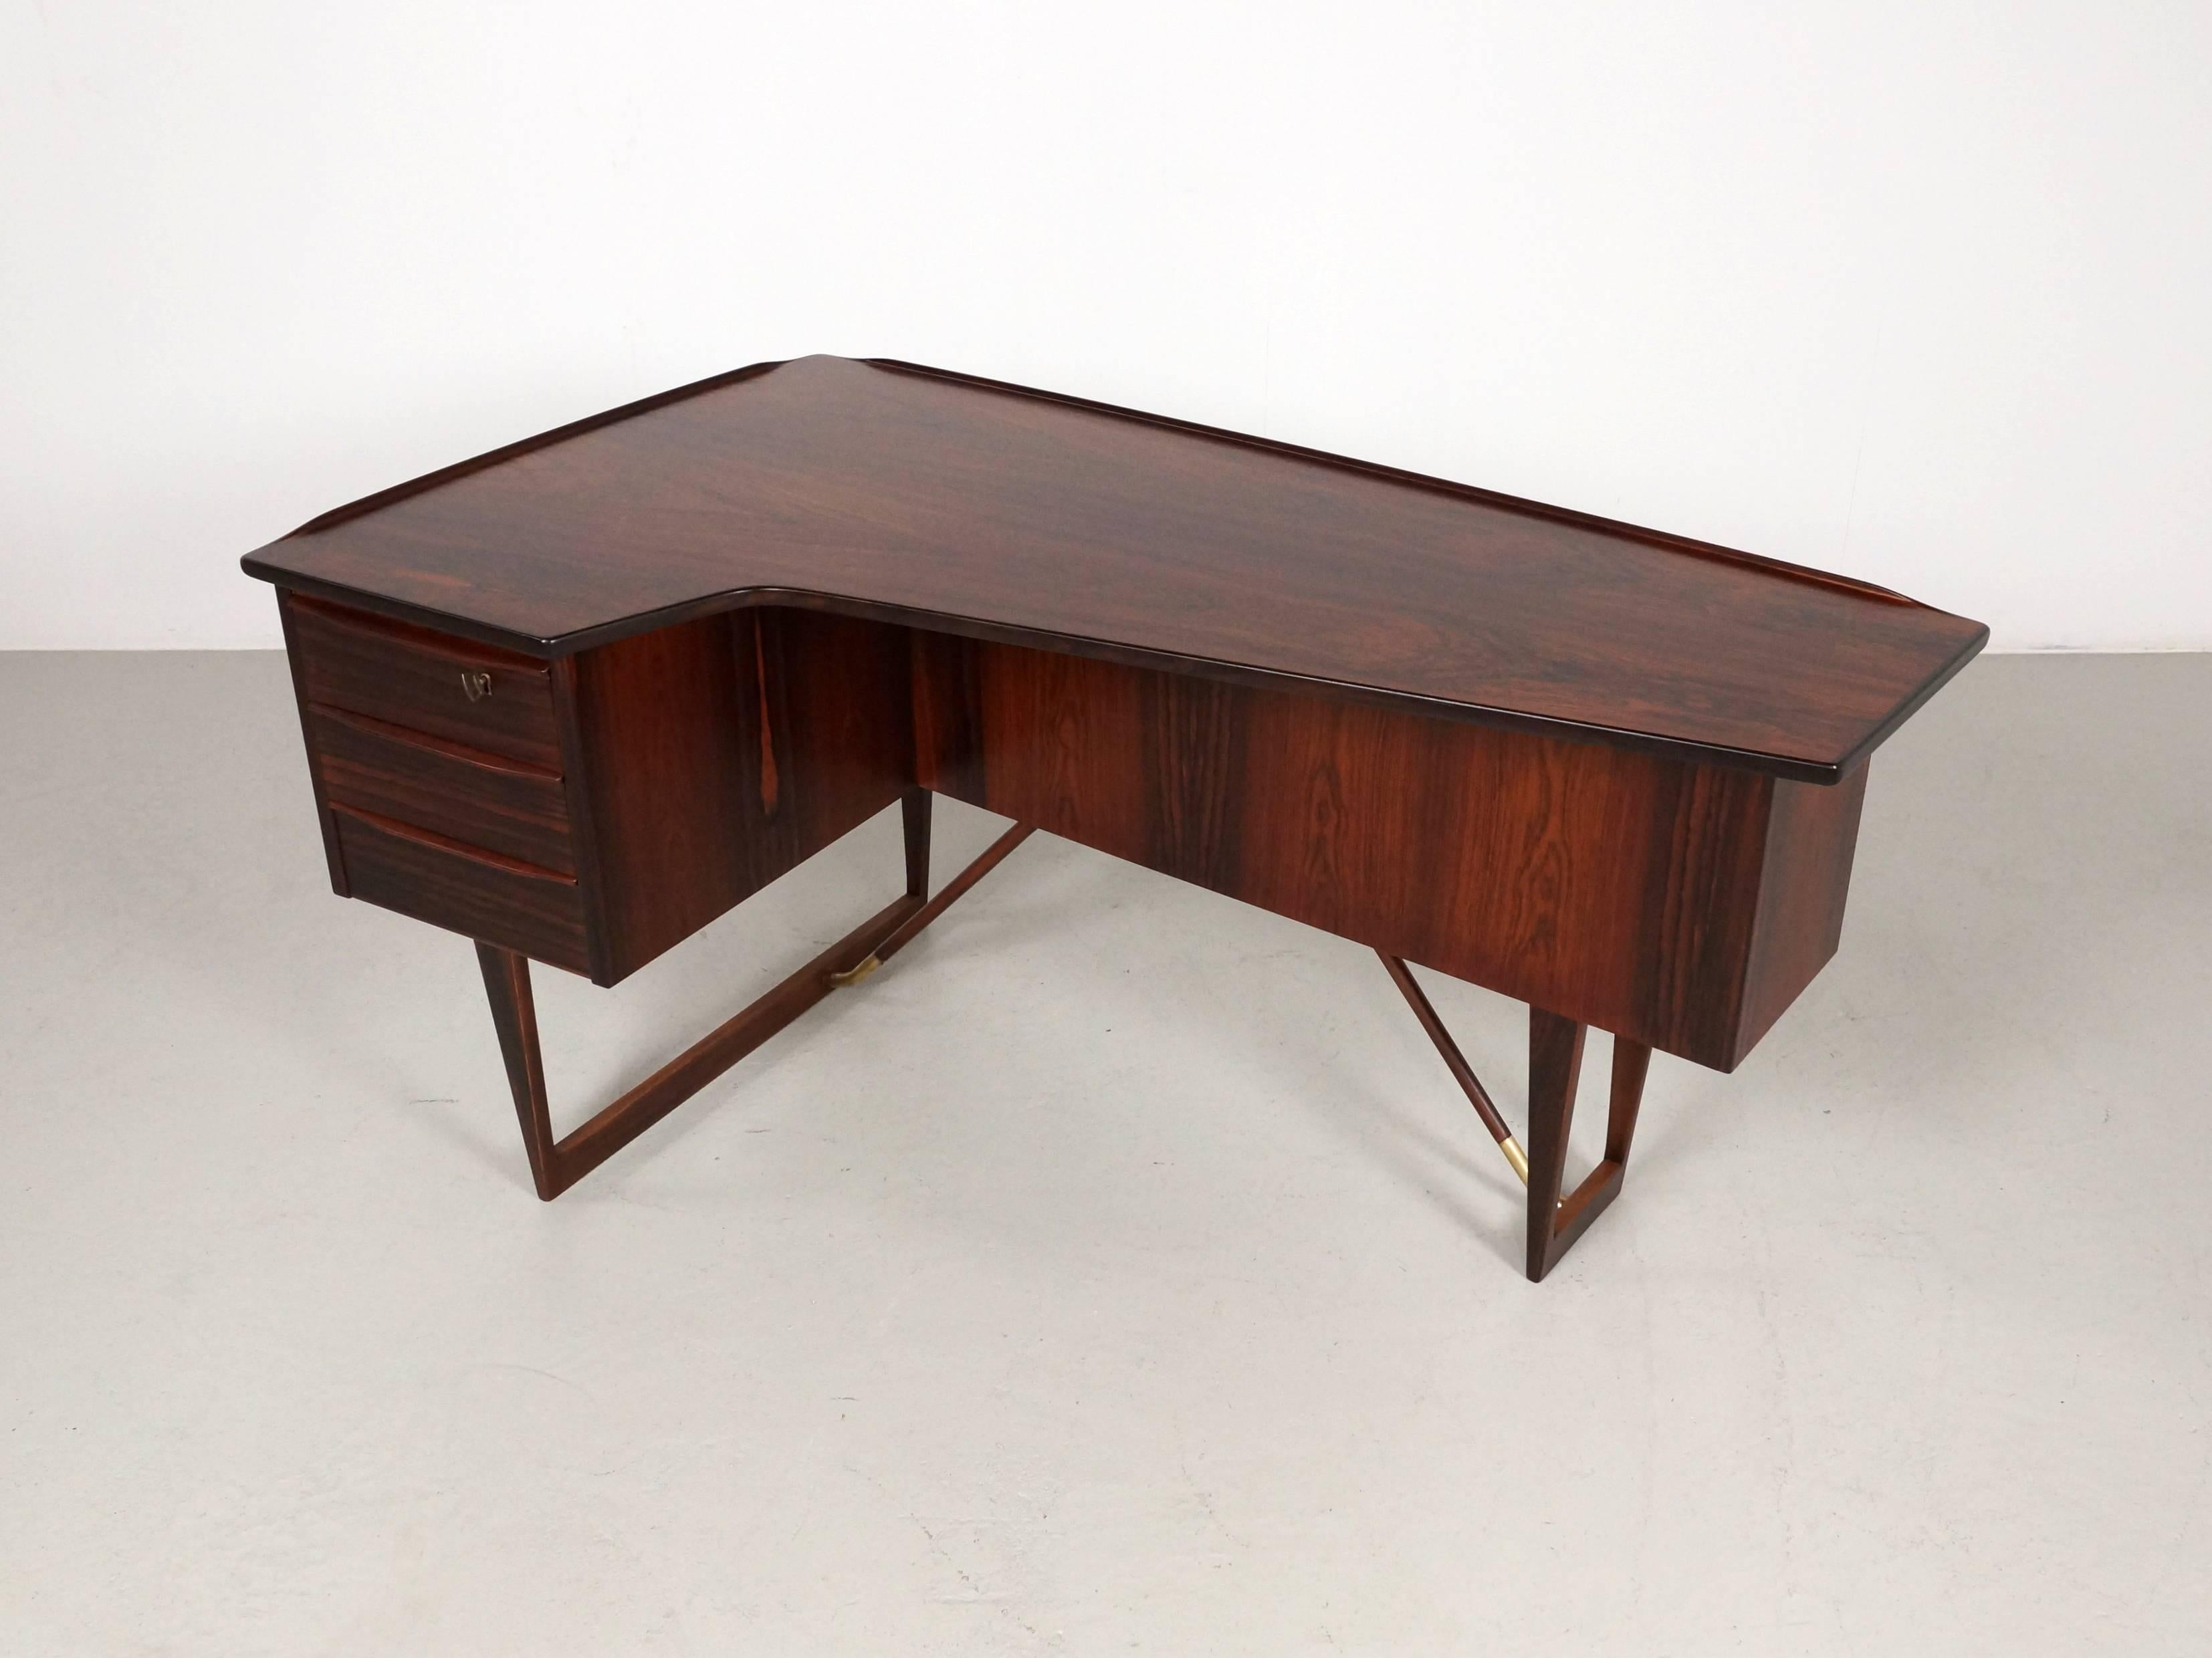 Beautiful Mahogany corner desk designed by Peter Løvig Nielsen for Hedensted Møbelfabrikin this Danish desk was designed in 1956.
Super elegant small corner desk with three drawers and has in the back of the desk a wide bookstand and a small cabinet